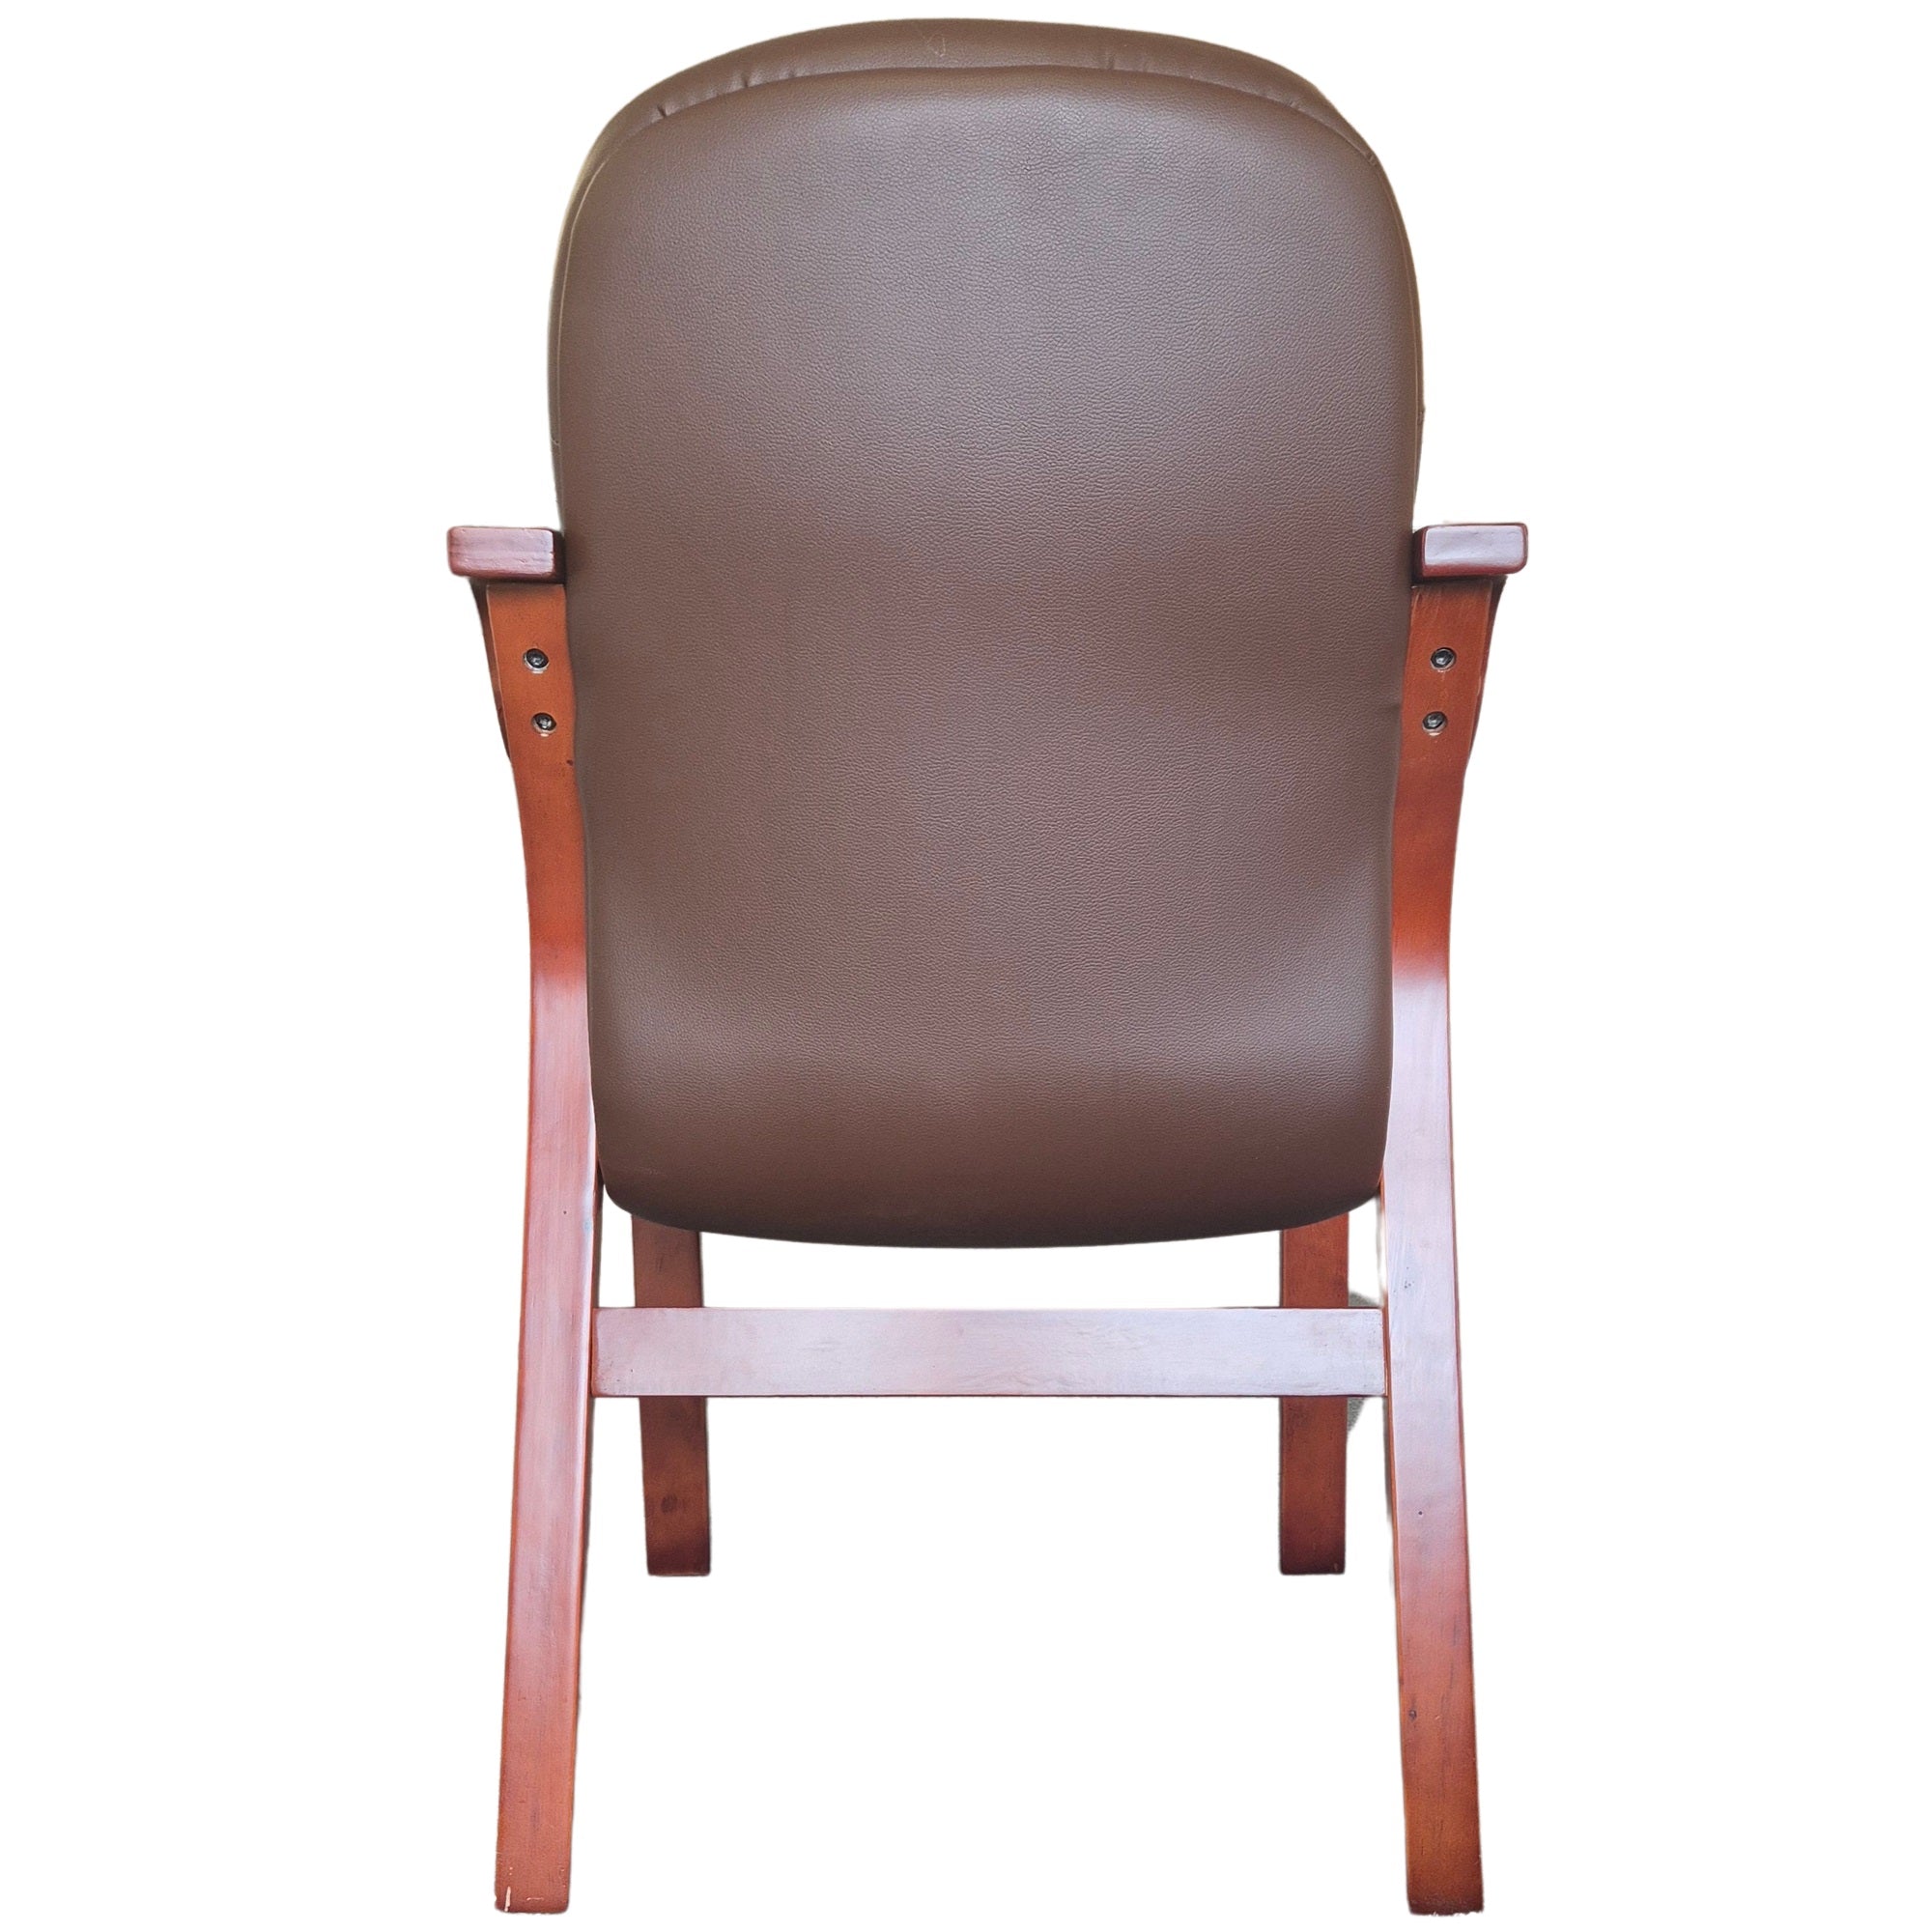 The Back Care Chair - 2 Colours